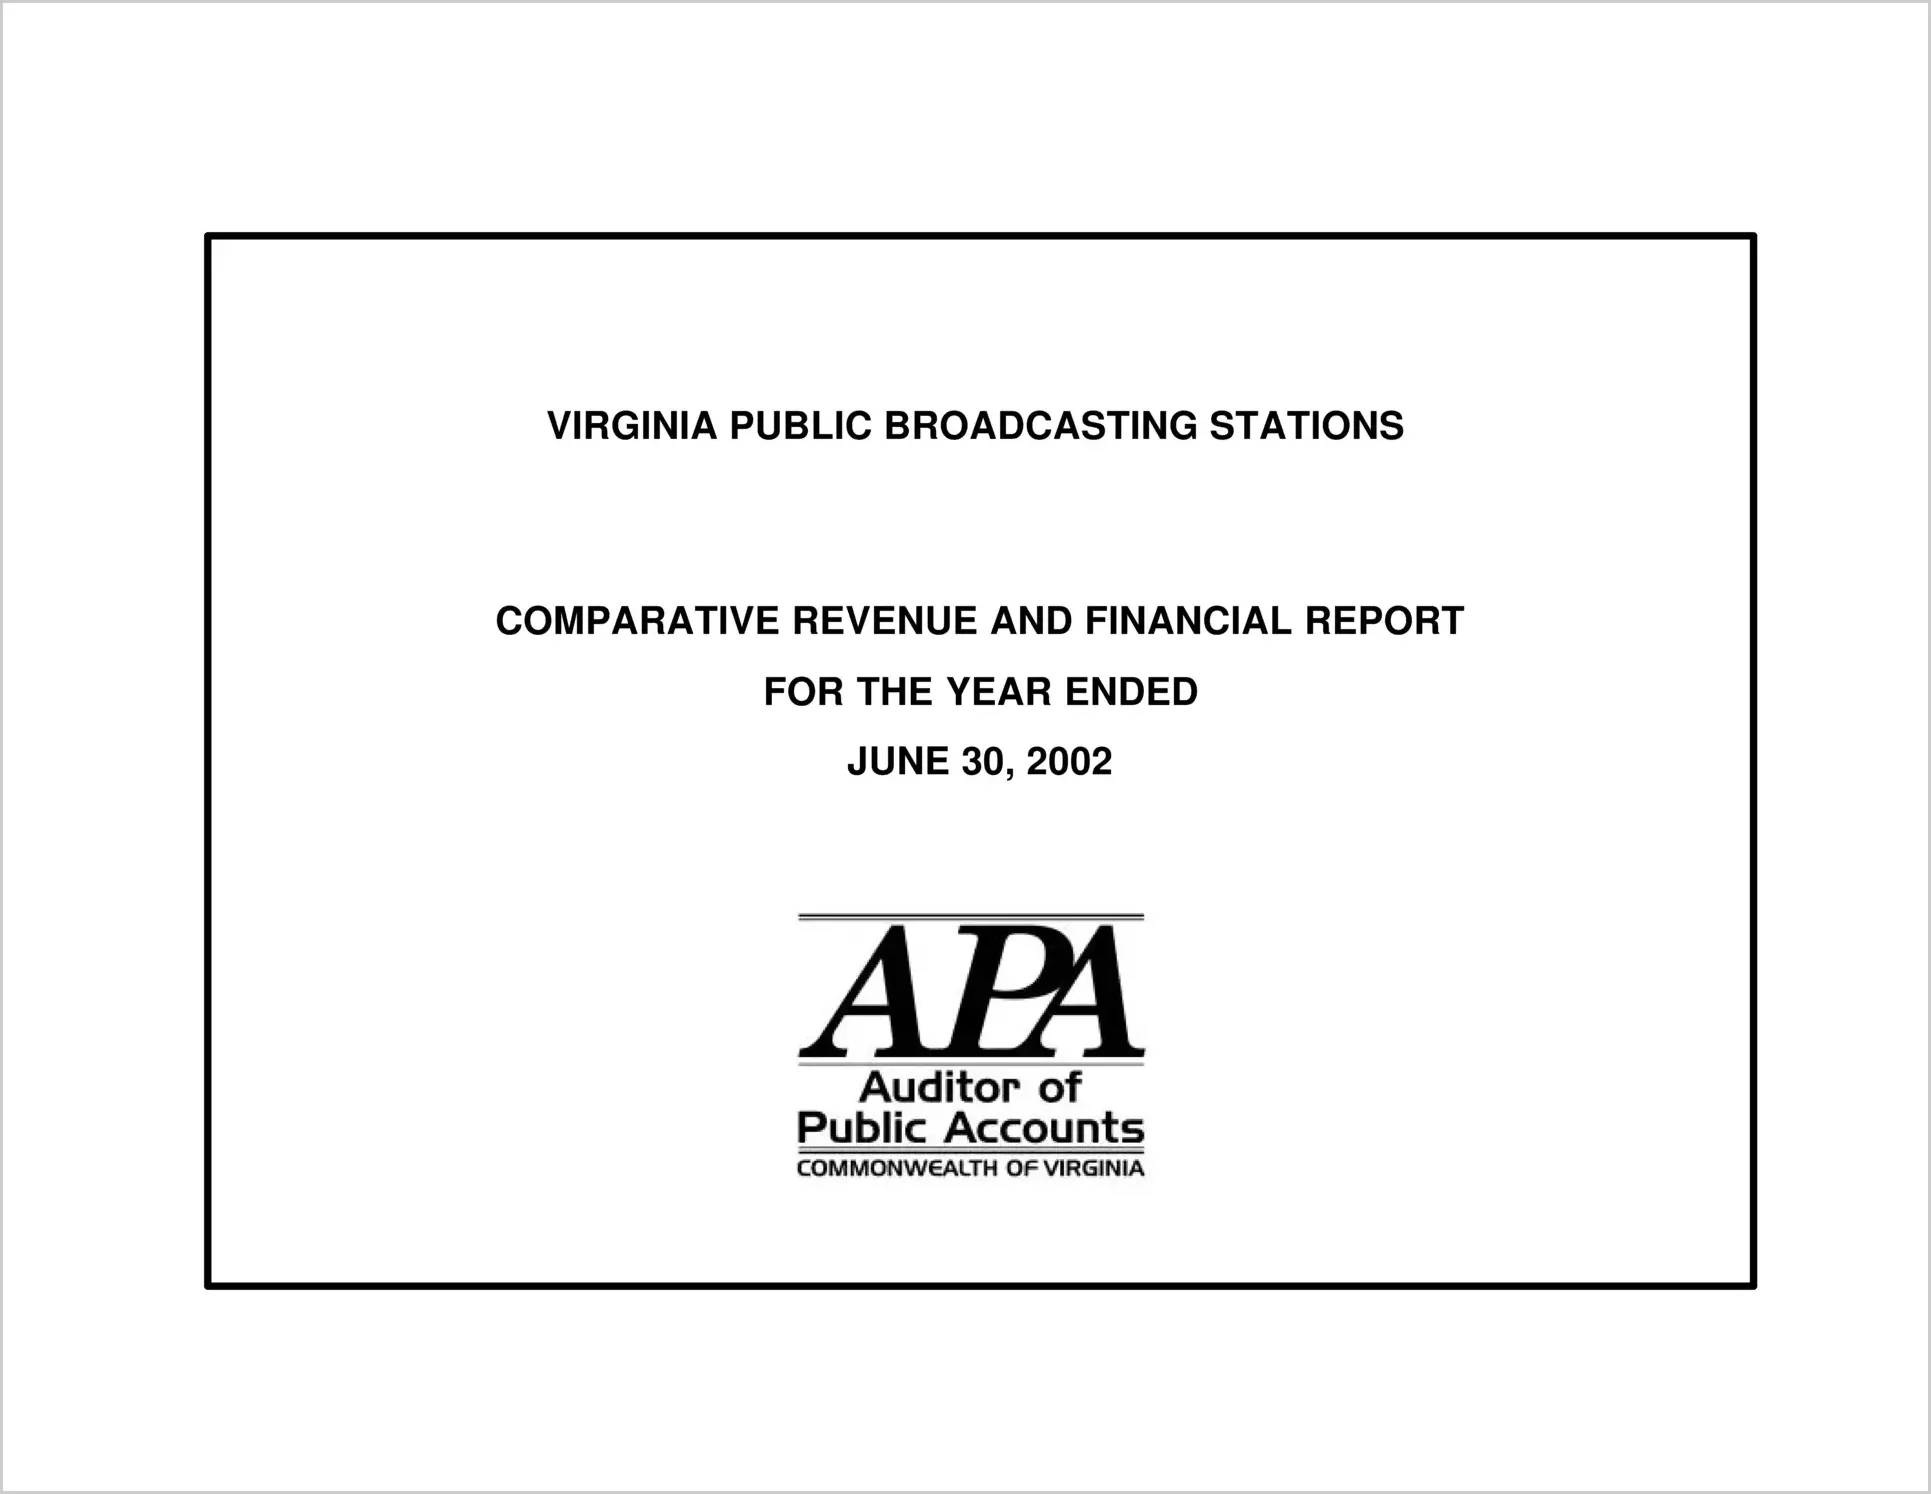 Special ReportComparative Revenue and Financial Report for the year ended June 30, 2002(Report Date: 5/9/2003)